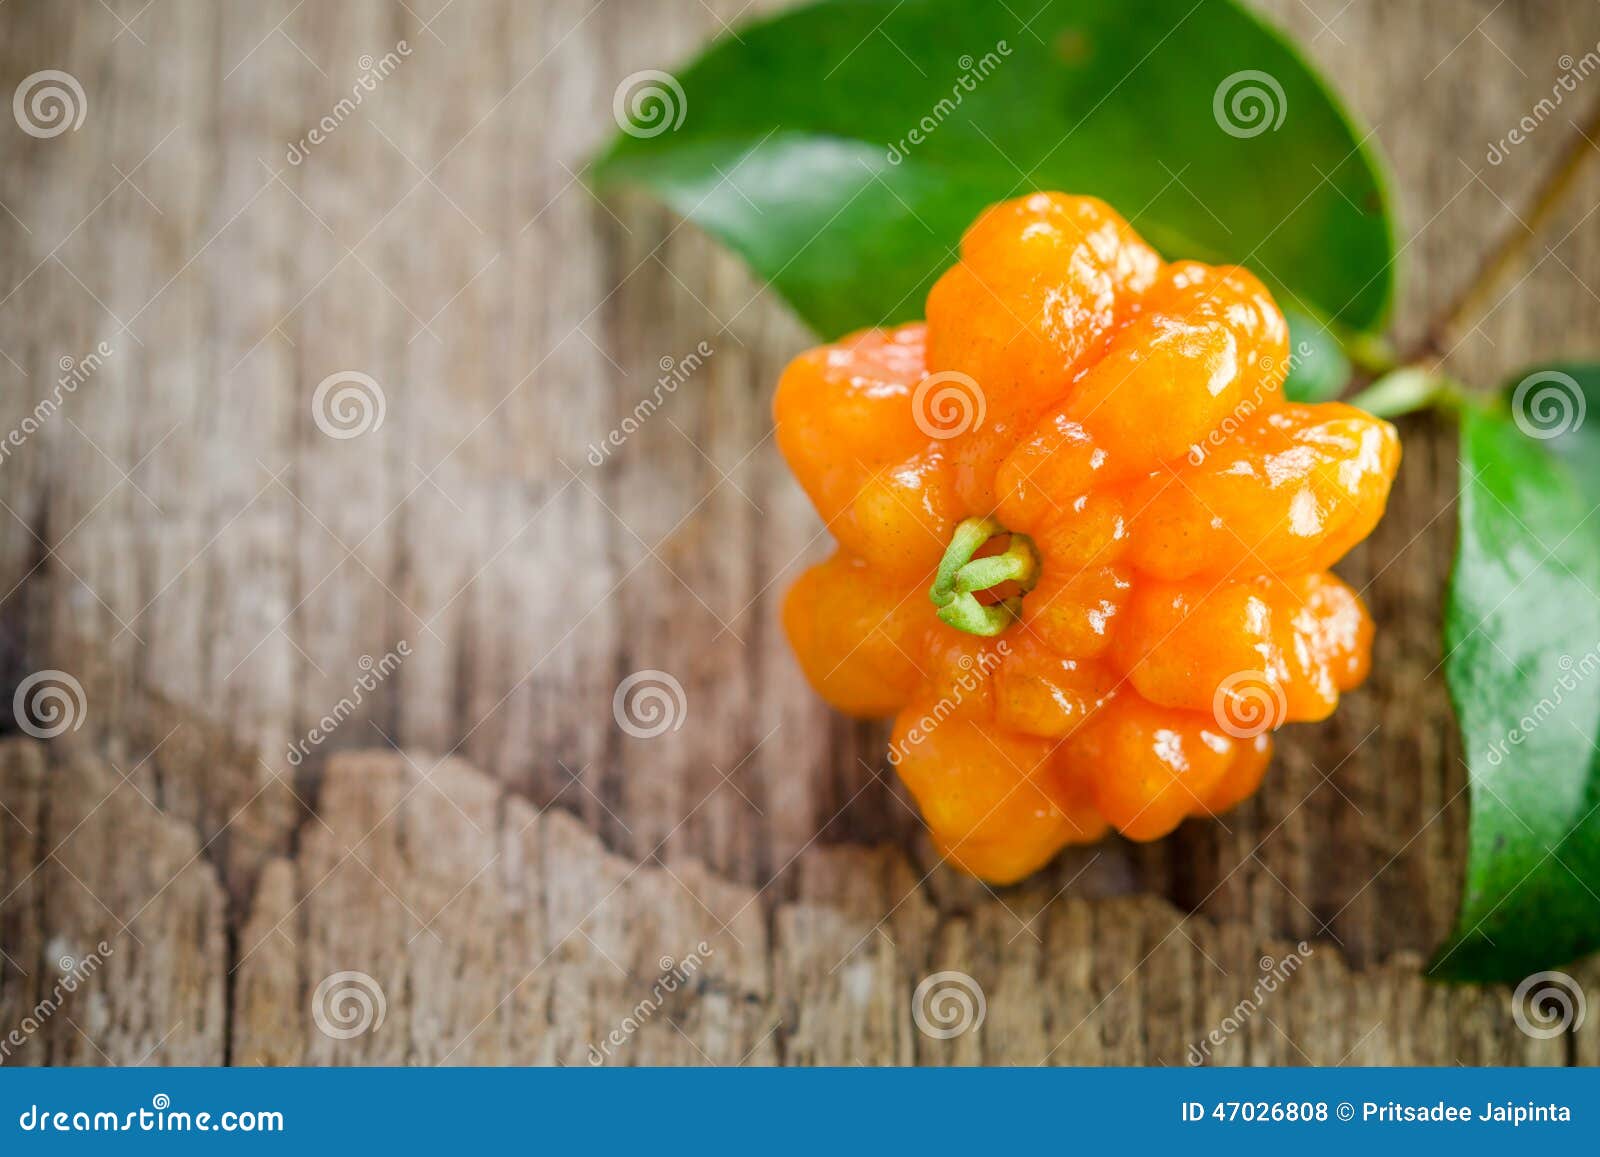 Tropical fruit also called Pitanga, Brazilian Cherry, Suriname Cherry, Cayenne Cherry on wooden background.